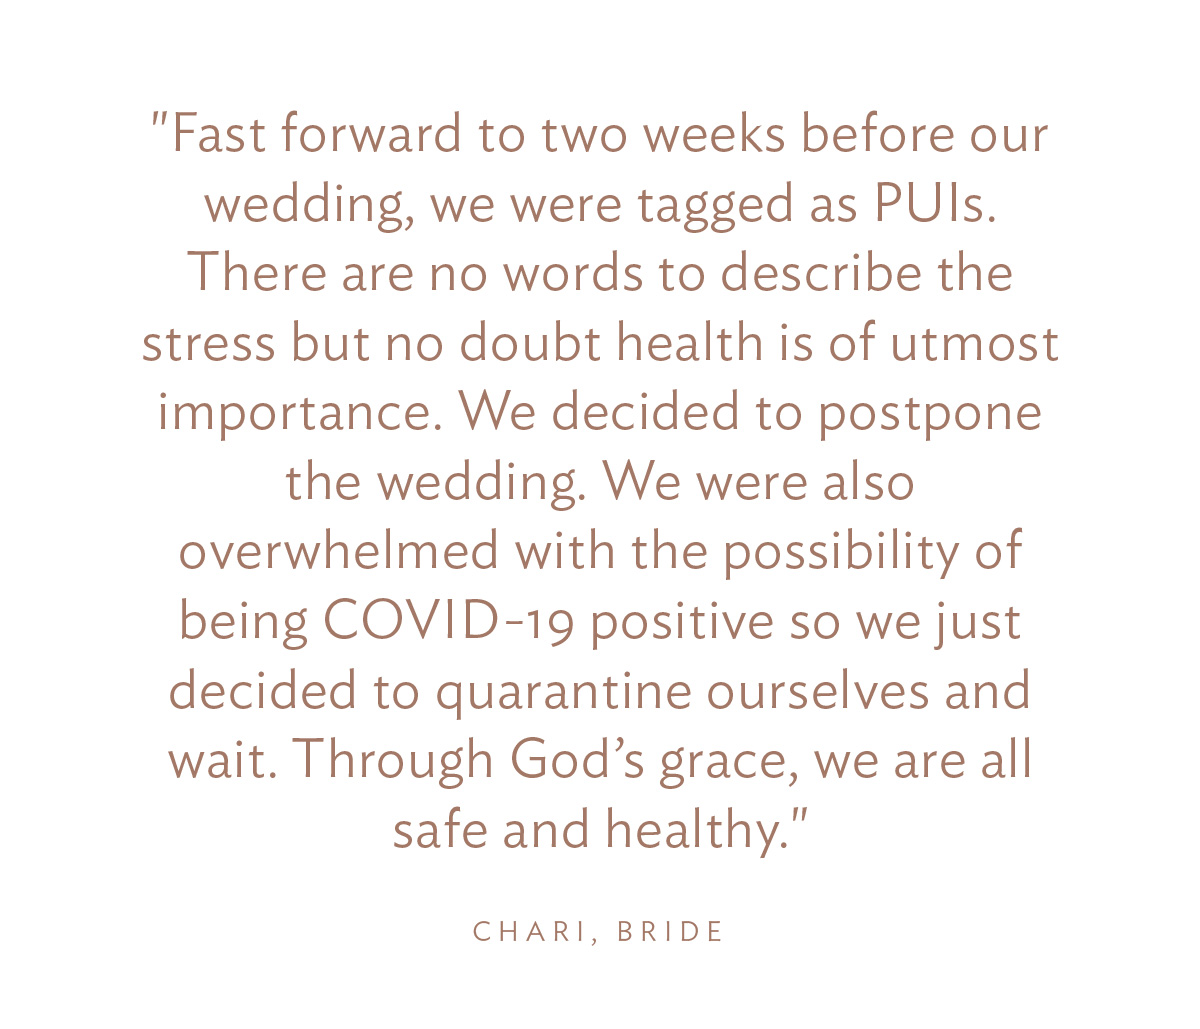 "Fast forward to two weeks before our wedding, we were tagged as PUIs. There are no words to describe the stress but no doubt health is of utmost importance. We decided to postpone the wedding. We were also overwhelmed with the possibility of being COVID-19 positive so we just decided to quarantine ourselves and wait. Through God’s grace, we are all safe and healthy."